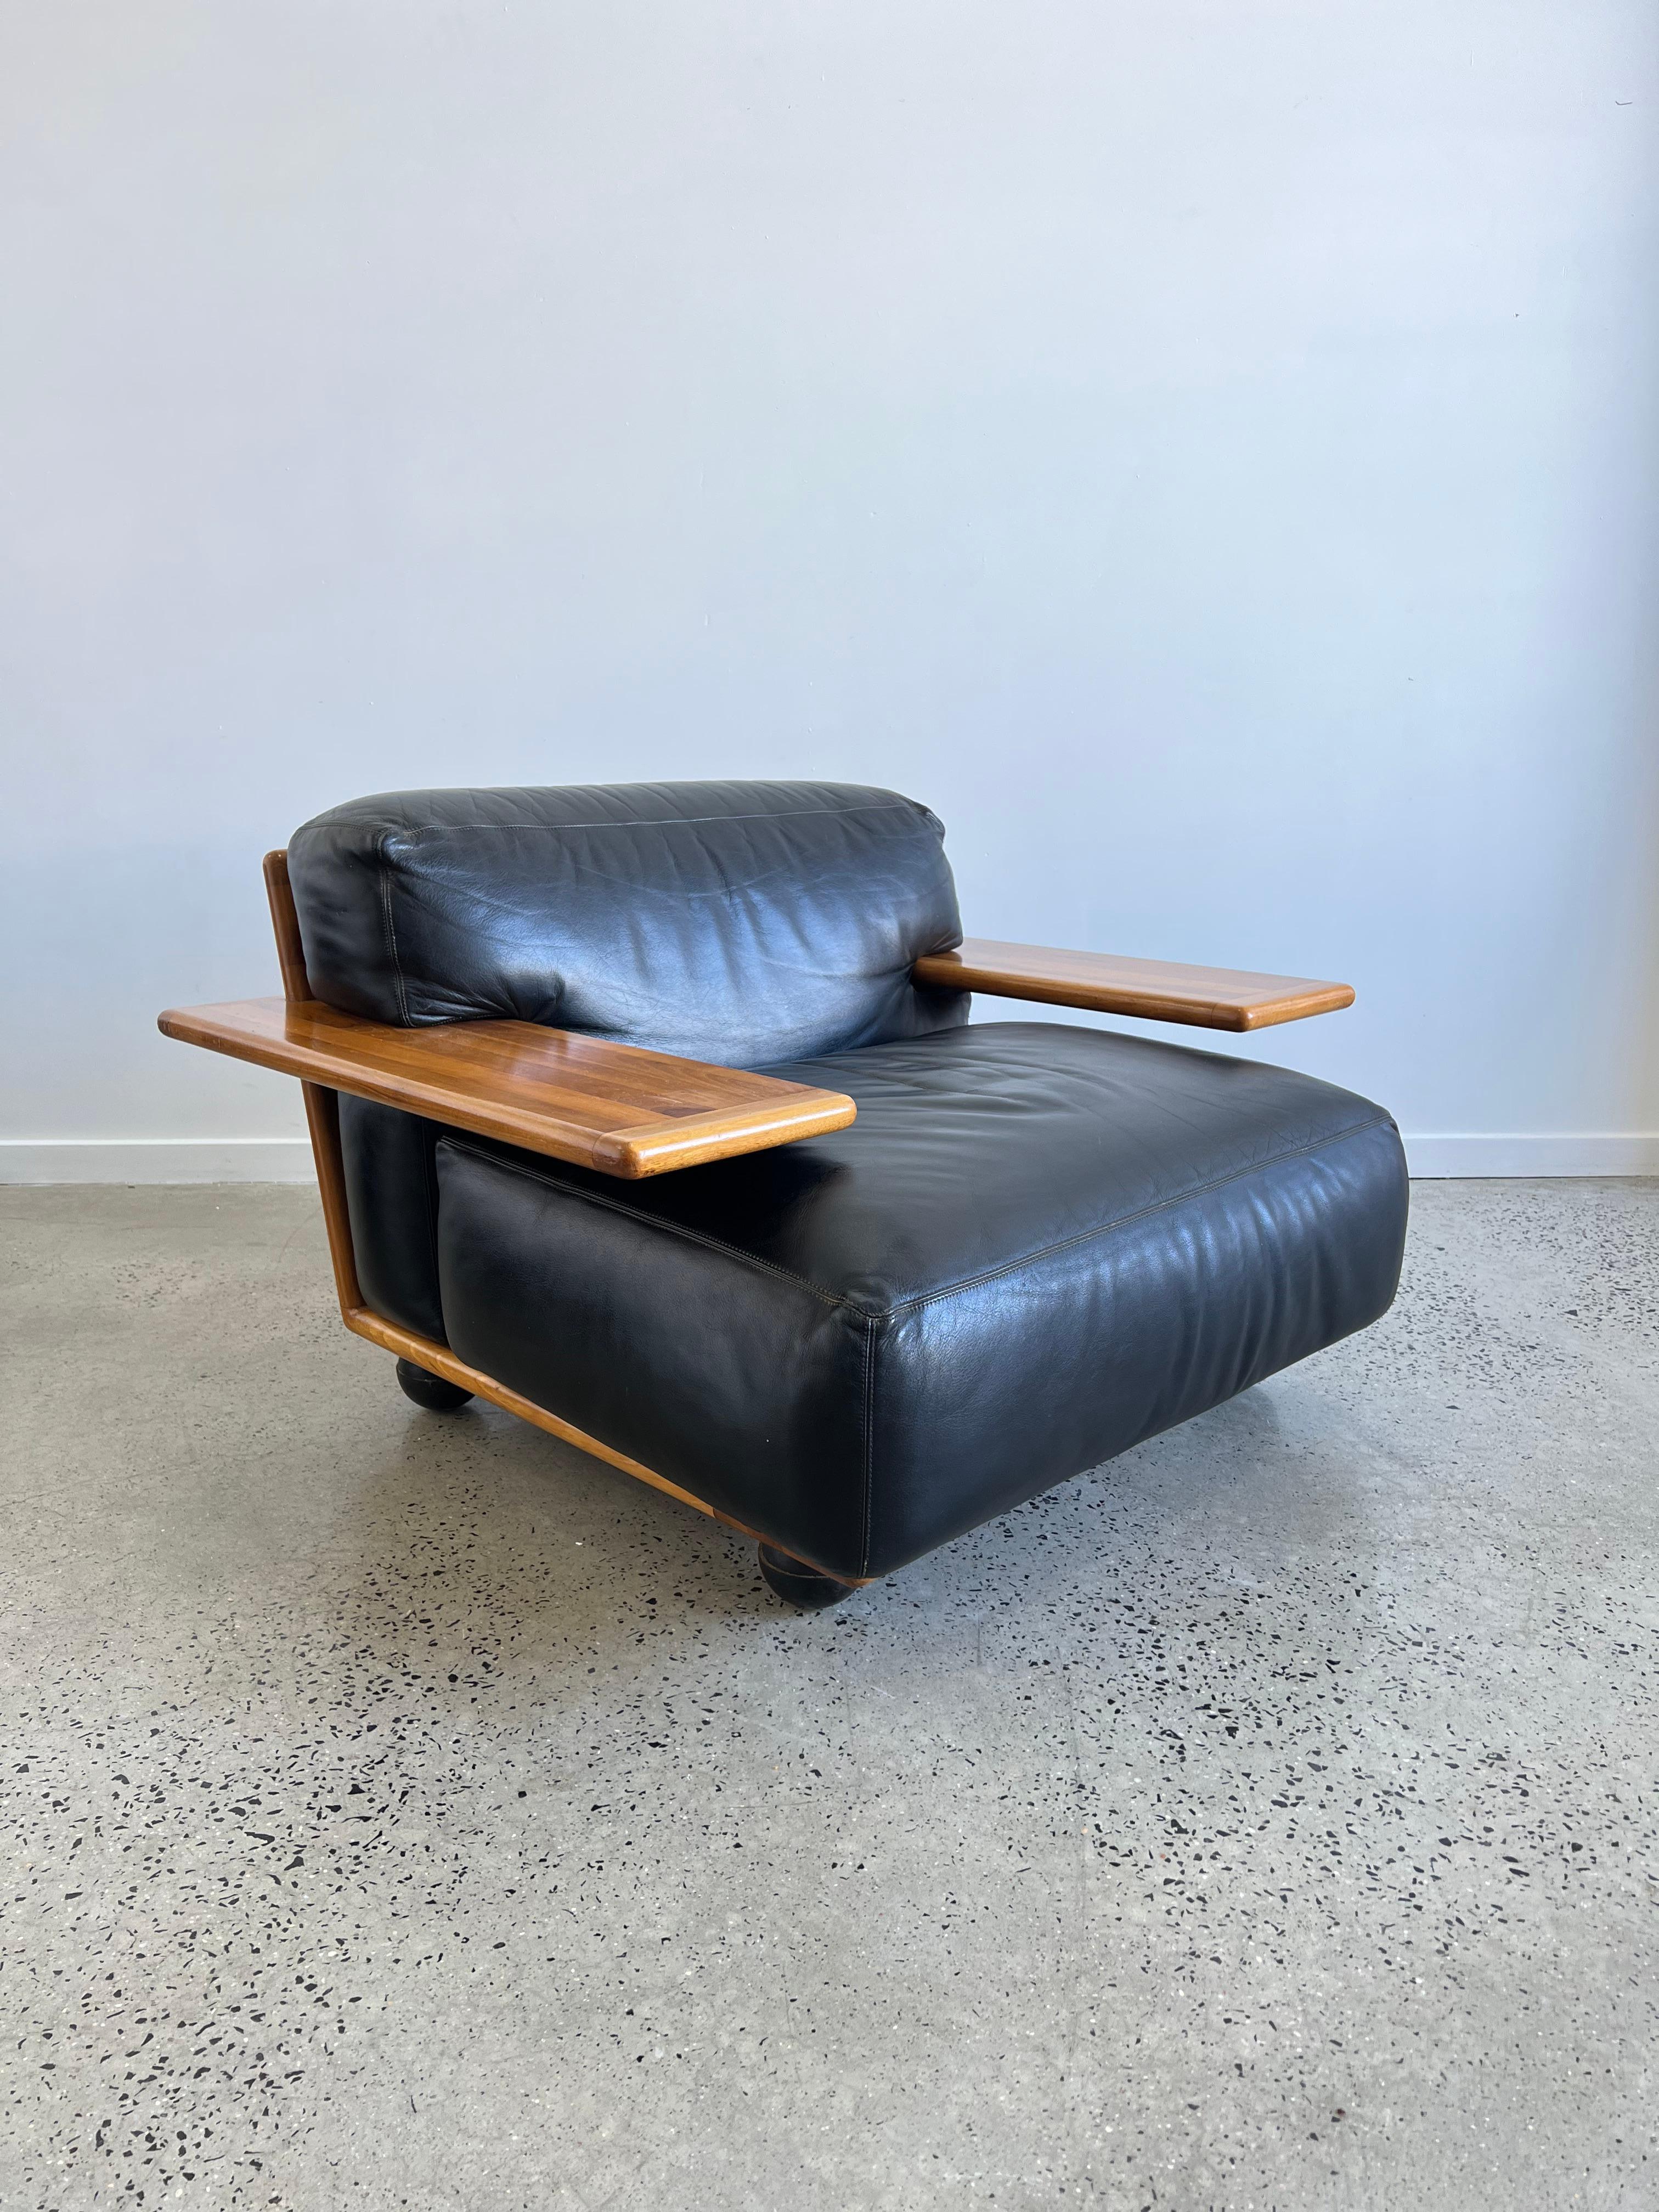 Fantastic low lounge chairs designed by Mario Bellini and manufactured by Cassina, Italy 1971. This chair is from the Pianura series and has a solid walnut wooden frame. The cushions are made of black leather. The legs are made of black